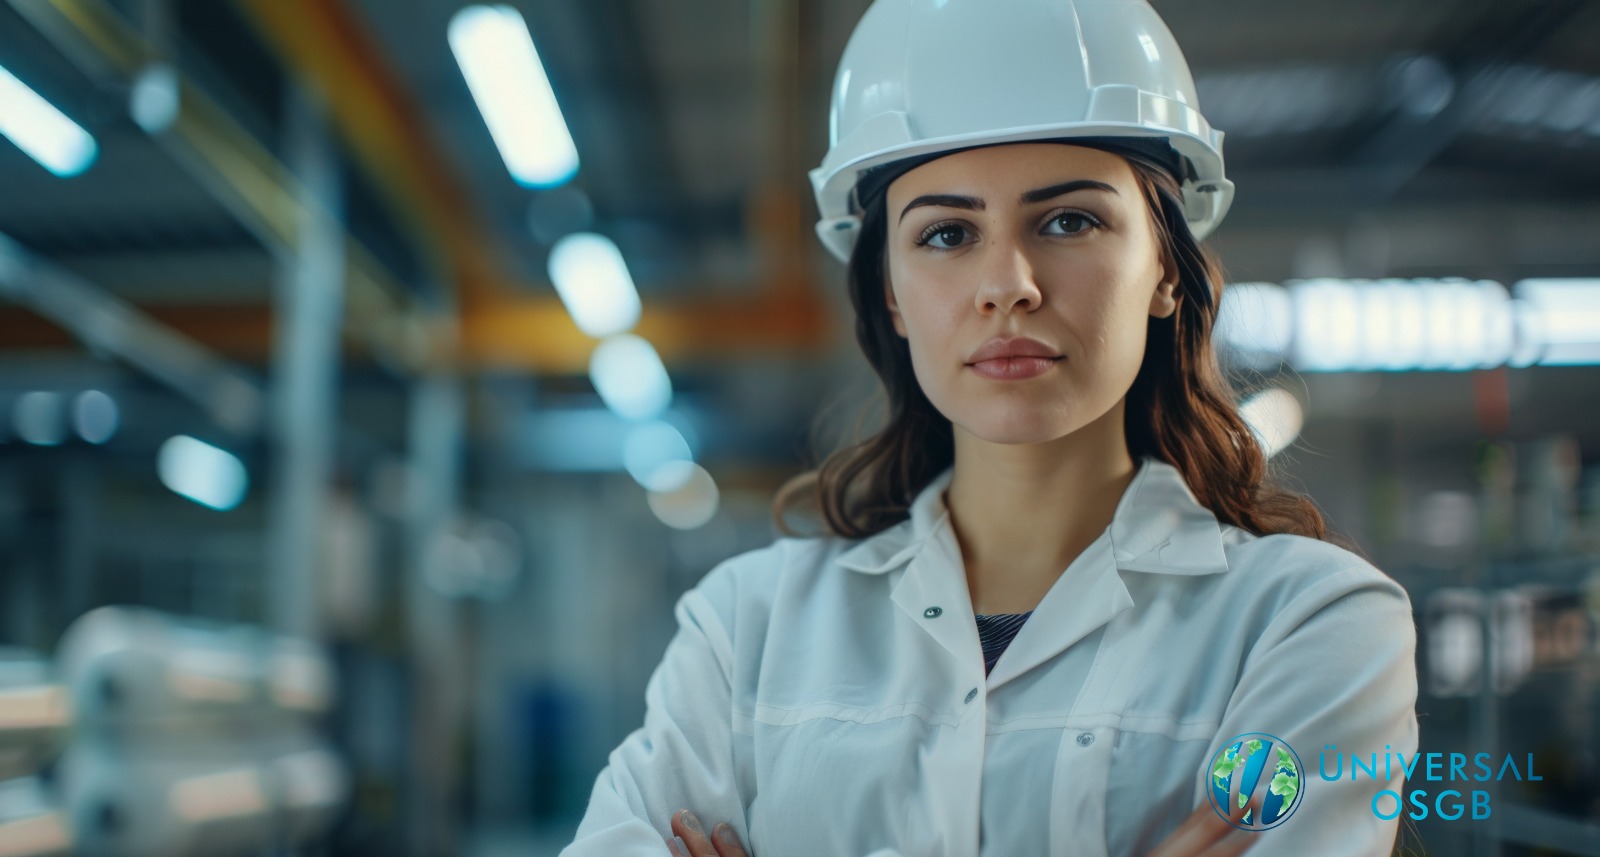 What is Occupational Disease? How Are They Legally Defined? What are the Most Common Occupational Diseases in Turkey? How can occupational diseases be prevented?